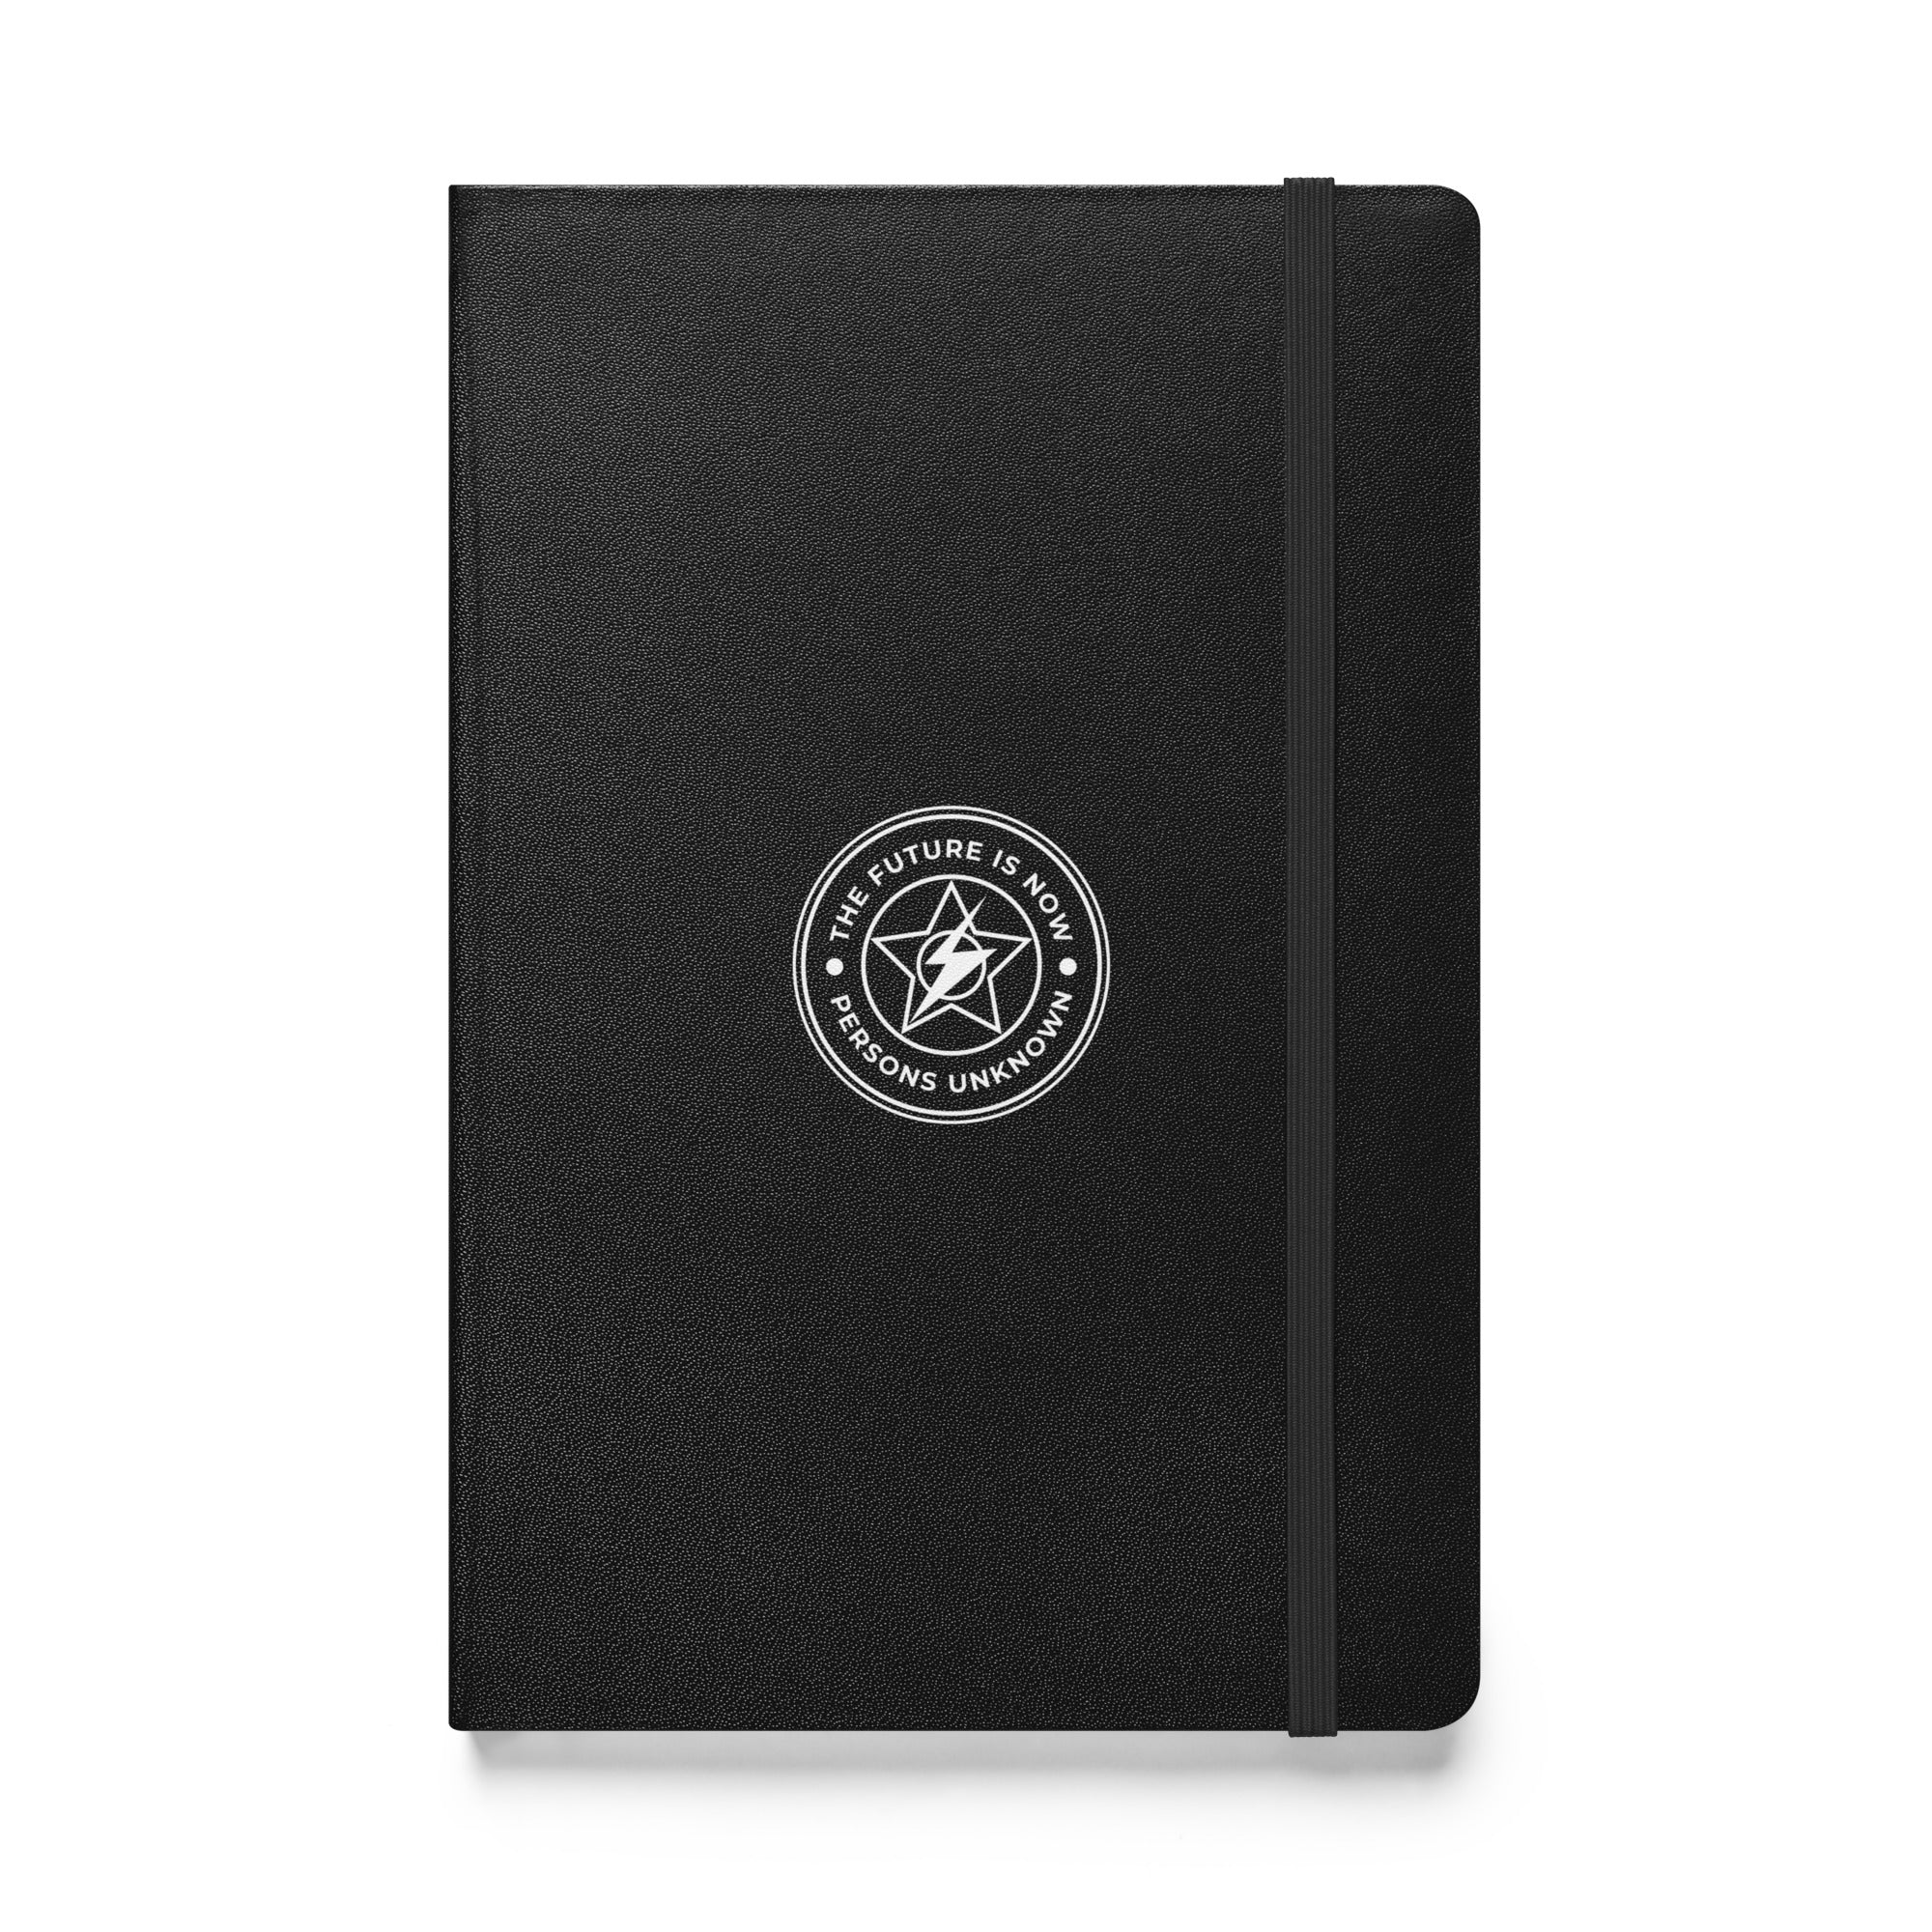 PU - The Future is Now. Hard cover note book